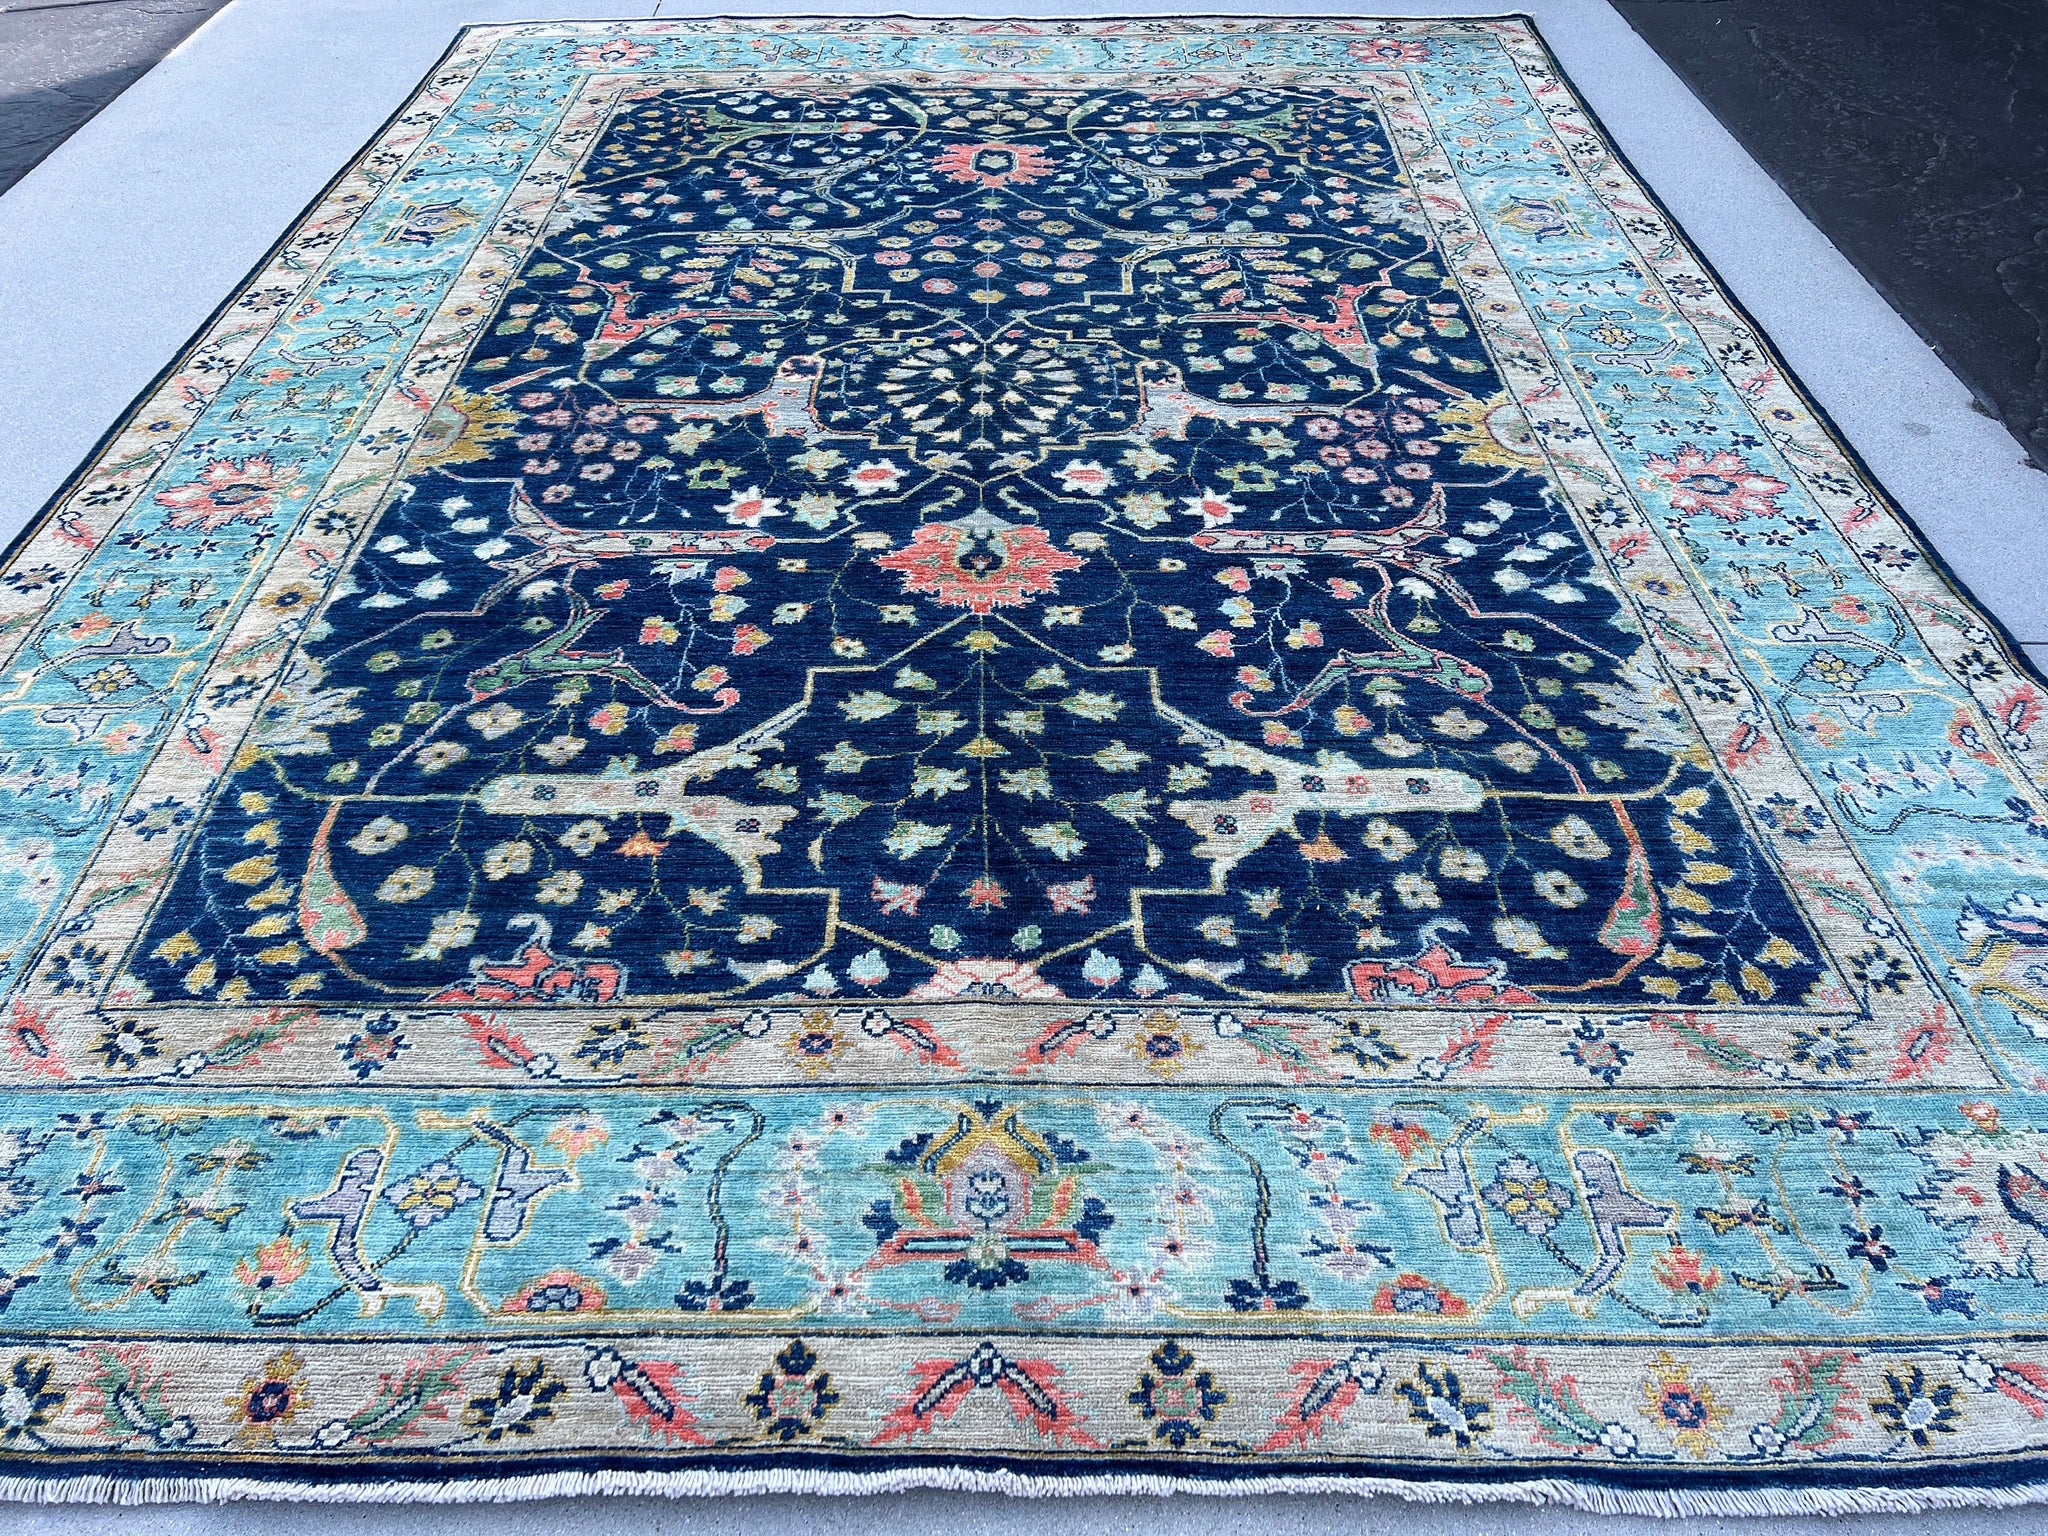 9x12 (270x365) Handmade Afghan Rug | Midnight Navy Sky Blue Grey Ivory Cream Mustard Yellow Salmon Pink Green | Turkish Floral Knotted Wool